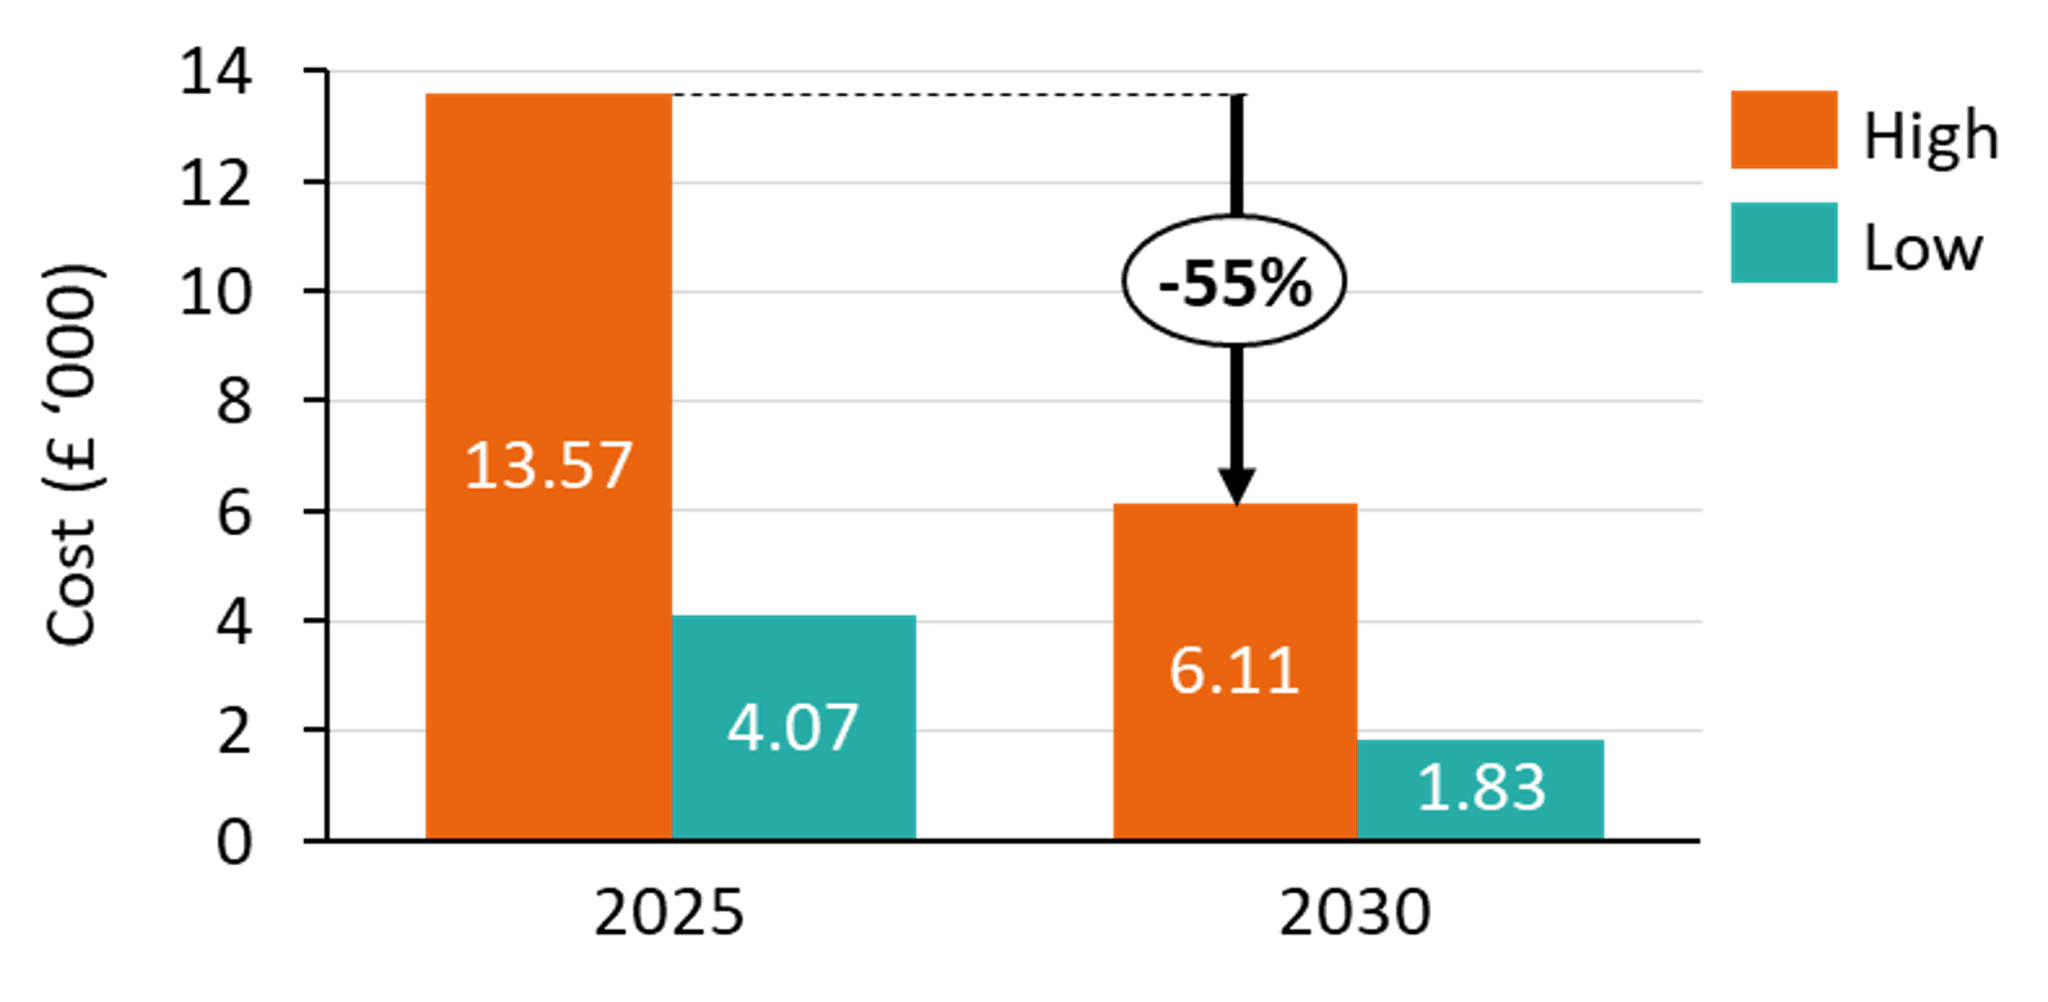 A chart showing the associated costs for hardware and installations for a 50 kW AC charger in 2025 and 2030, respectively. The costs are given in terms the thousands of pounds. In 2025, the high cost is £13,570 and the low cost is £4,070. In 2030, the high cost is £6,110 and the low cost is £1,830. 